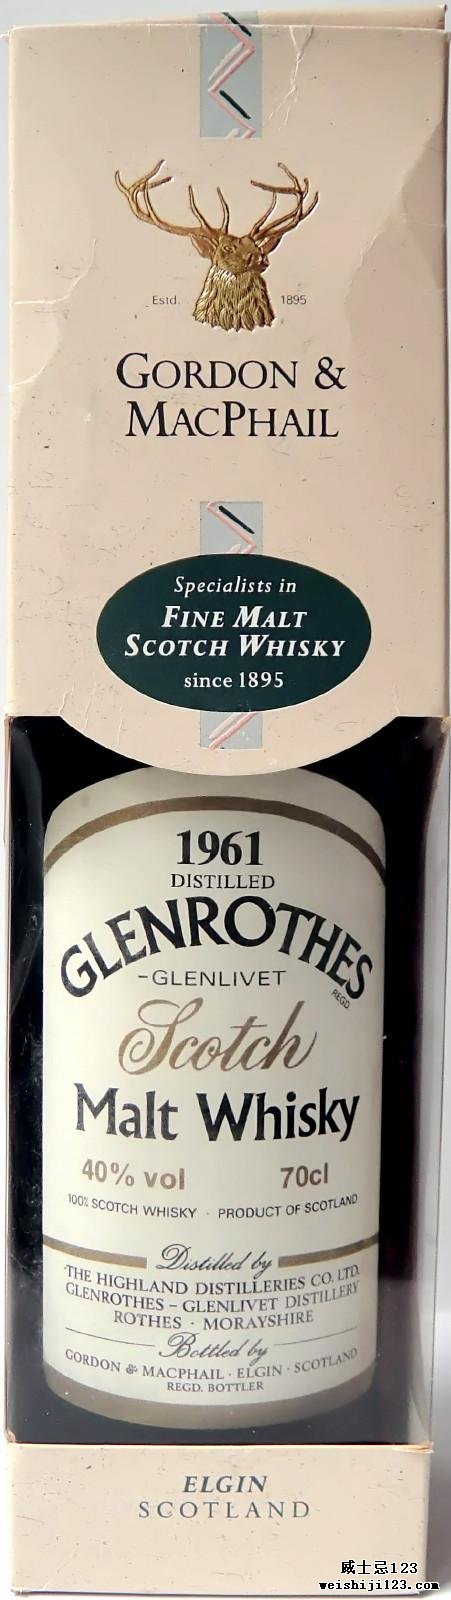 Glenrothes 1961 GM